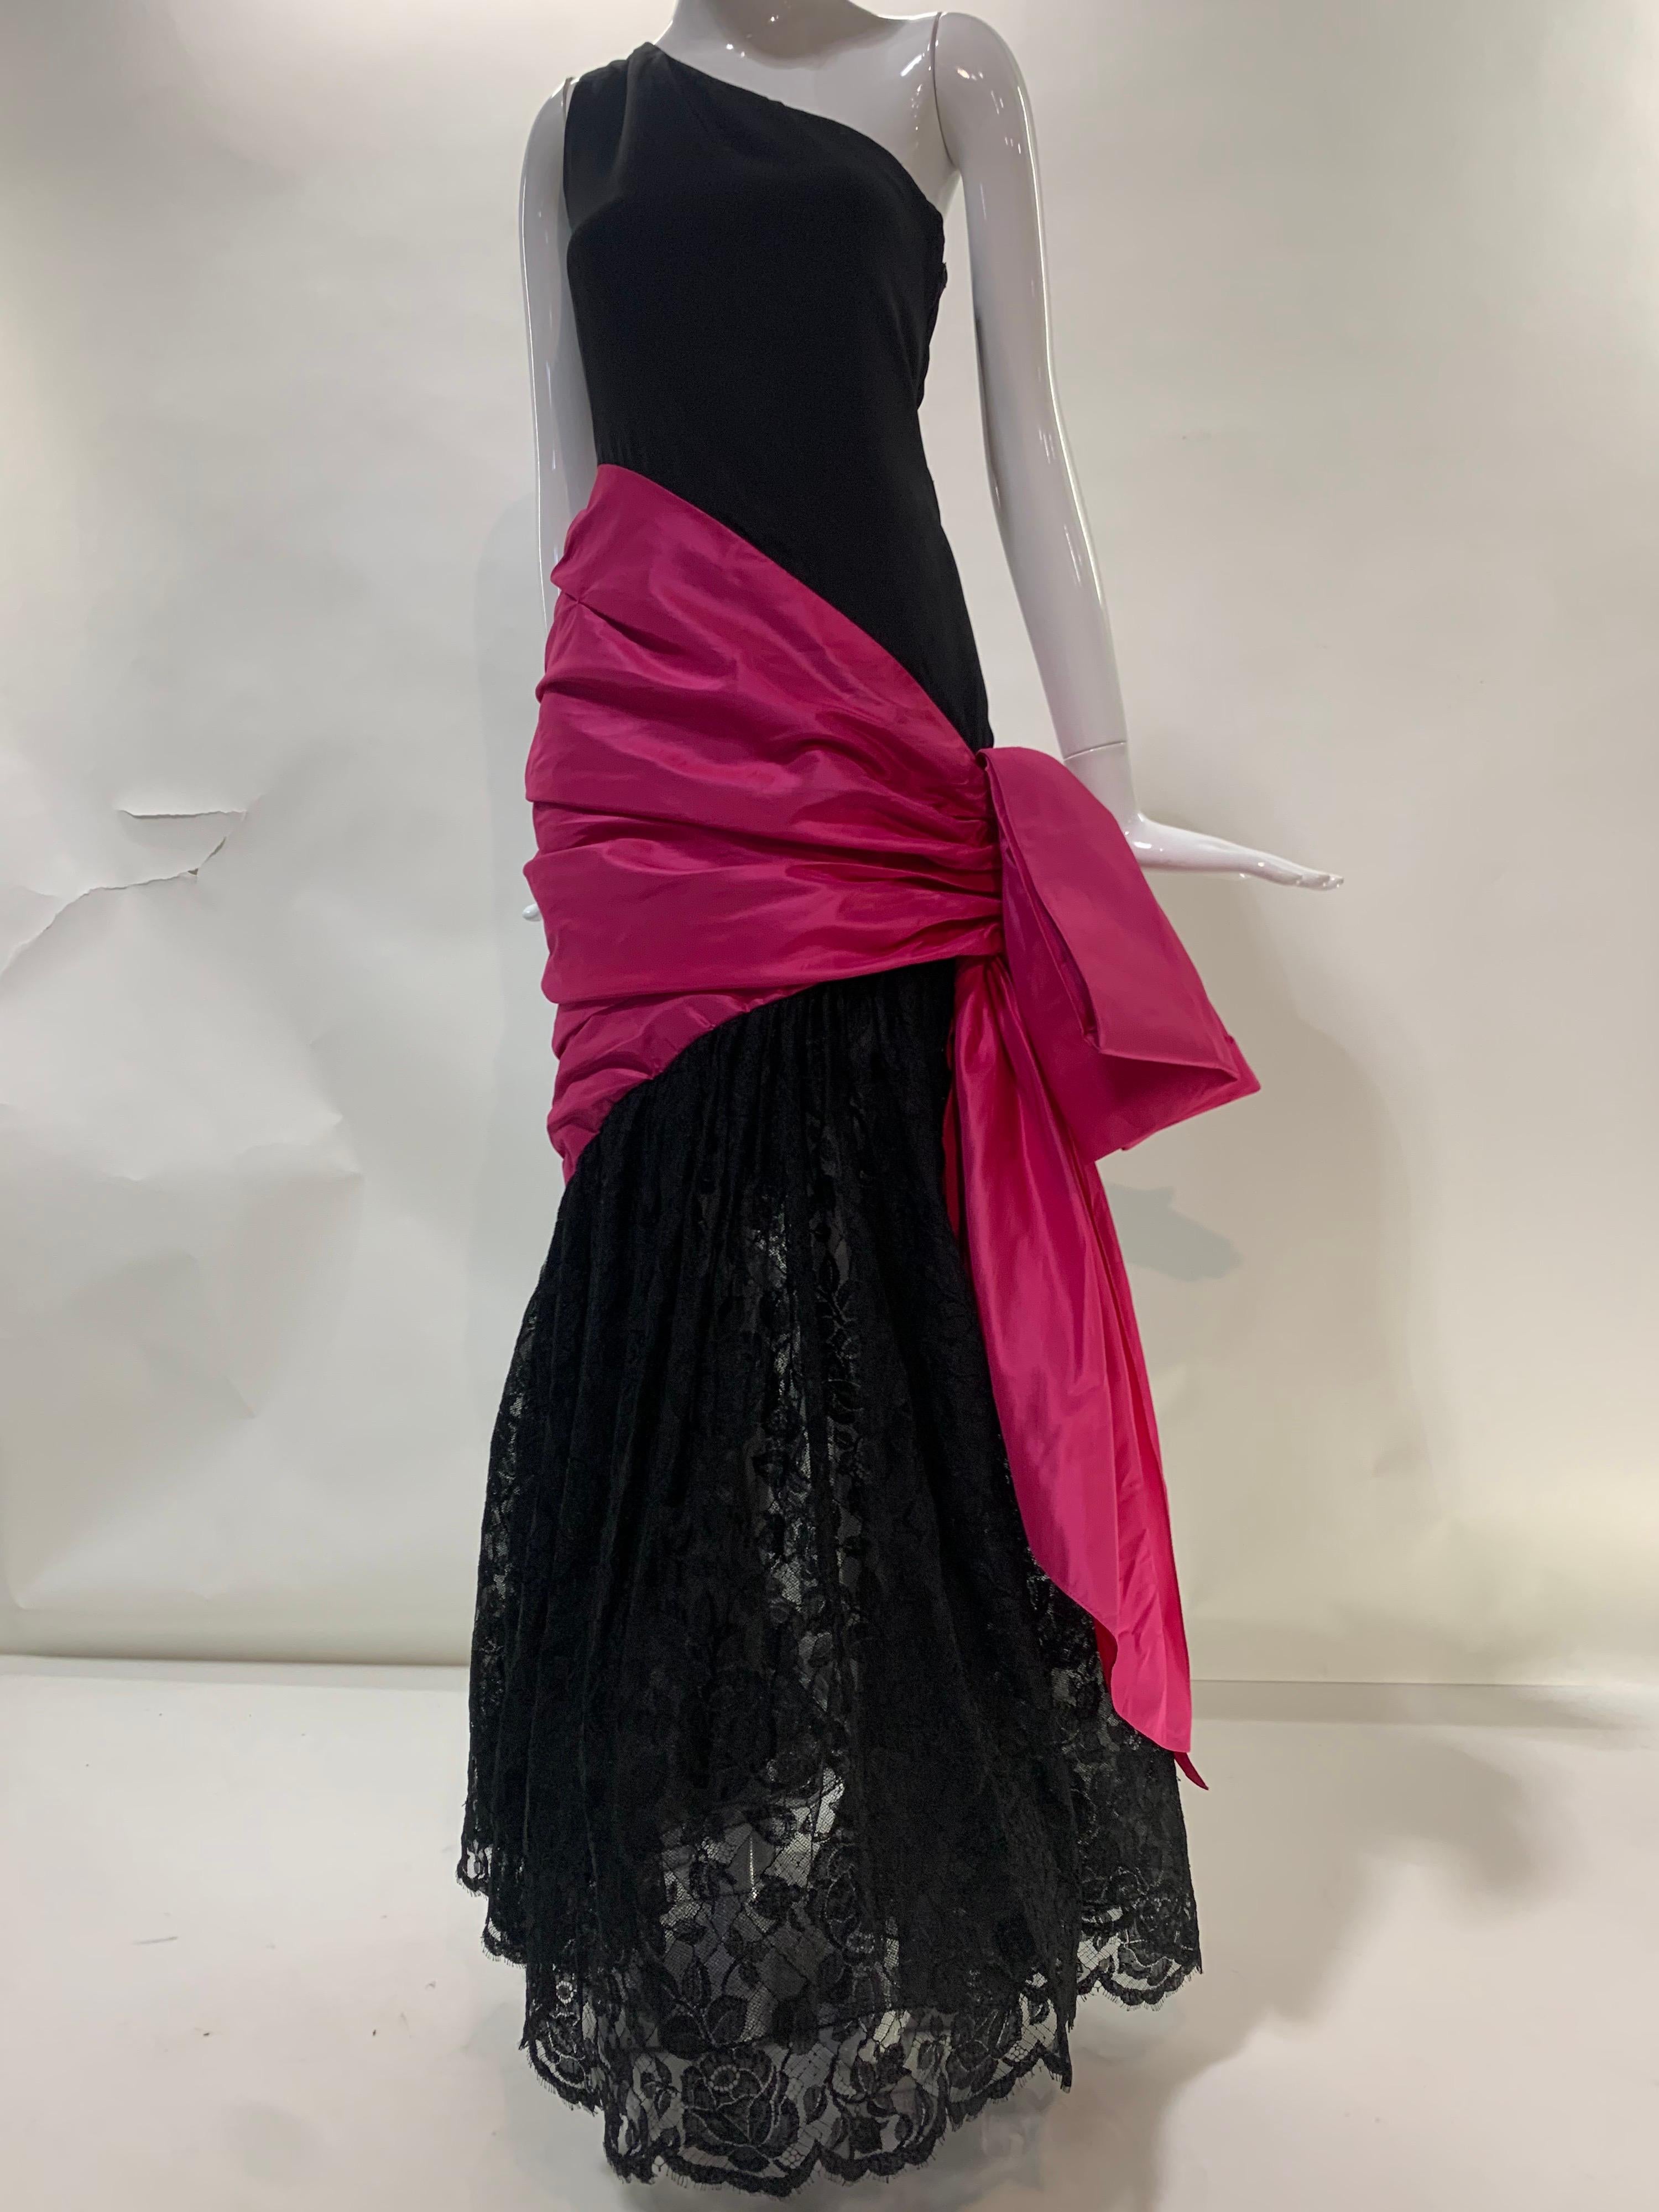 Women's 1980 Bill Blass Black Silk Crepe One-Shoulder Gown w/ Lace Skirt and Fuchsia Bow For Sale